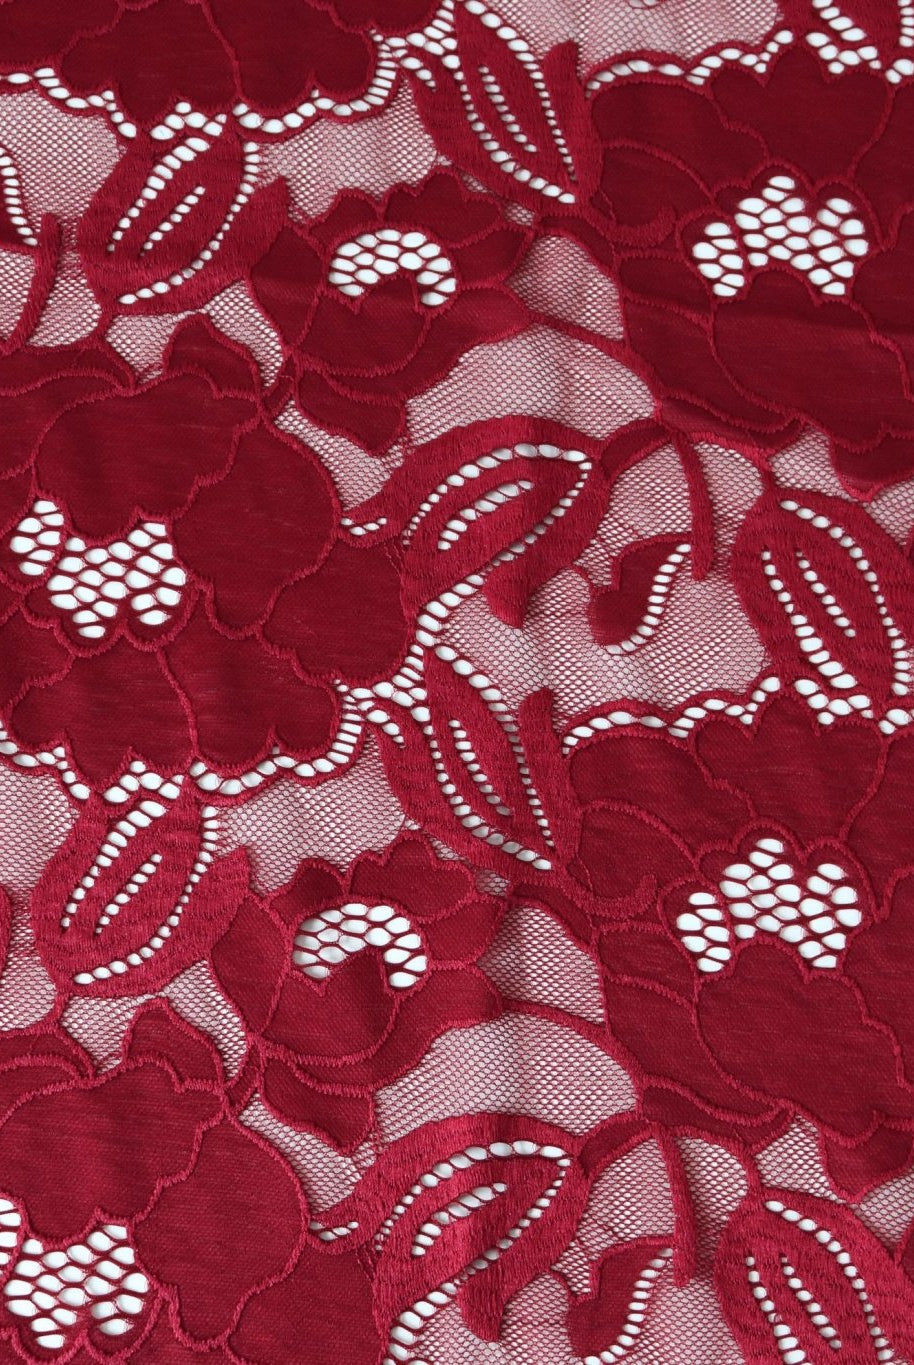 Peony Petals in Red. Stretch Lace Fabric. SL-127-RED - Boho Fabrics